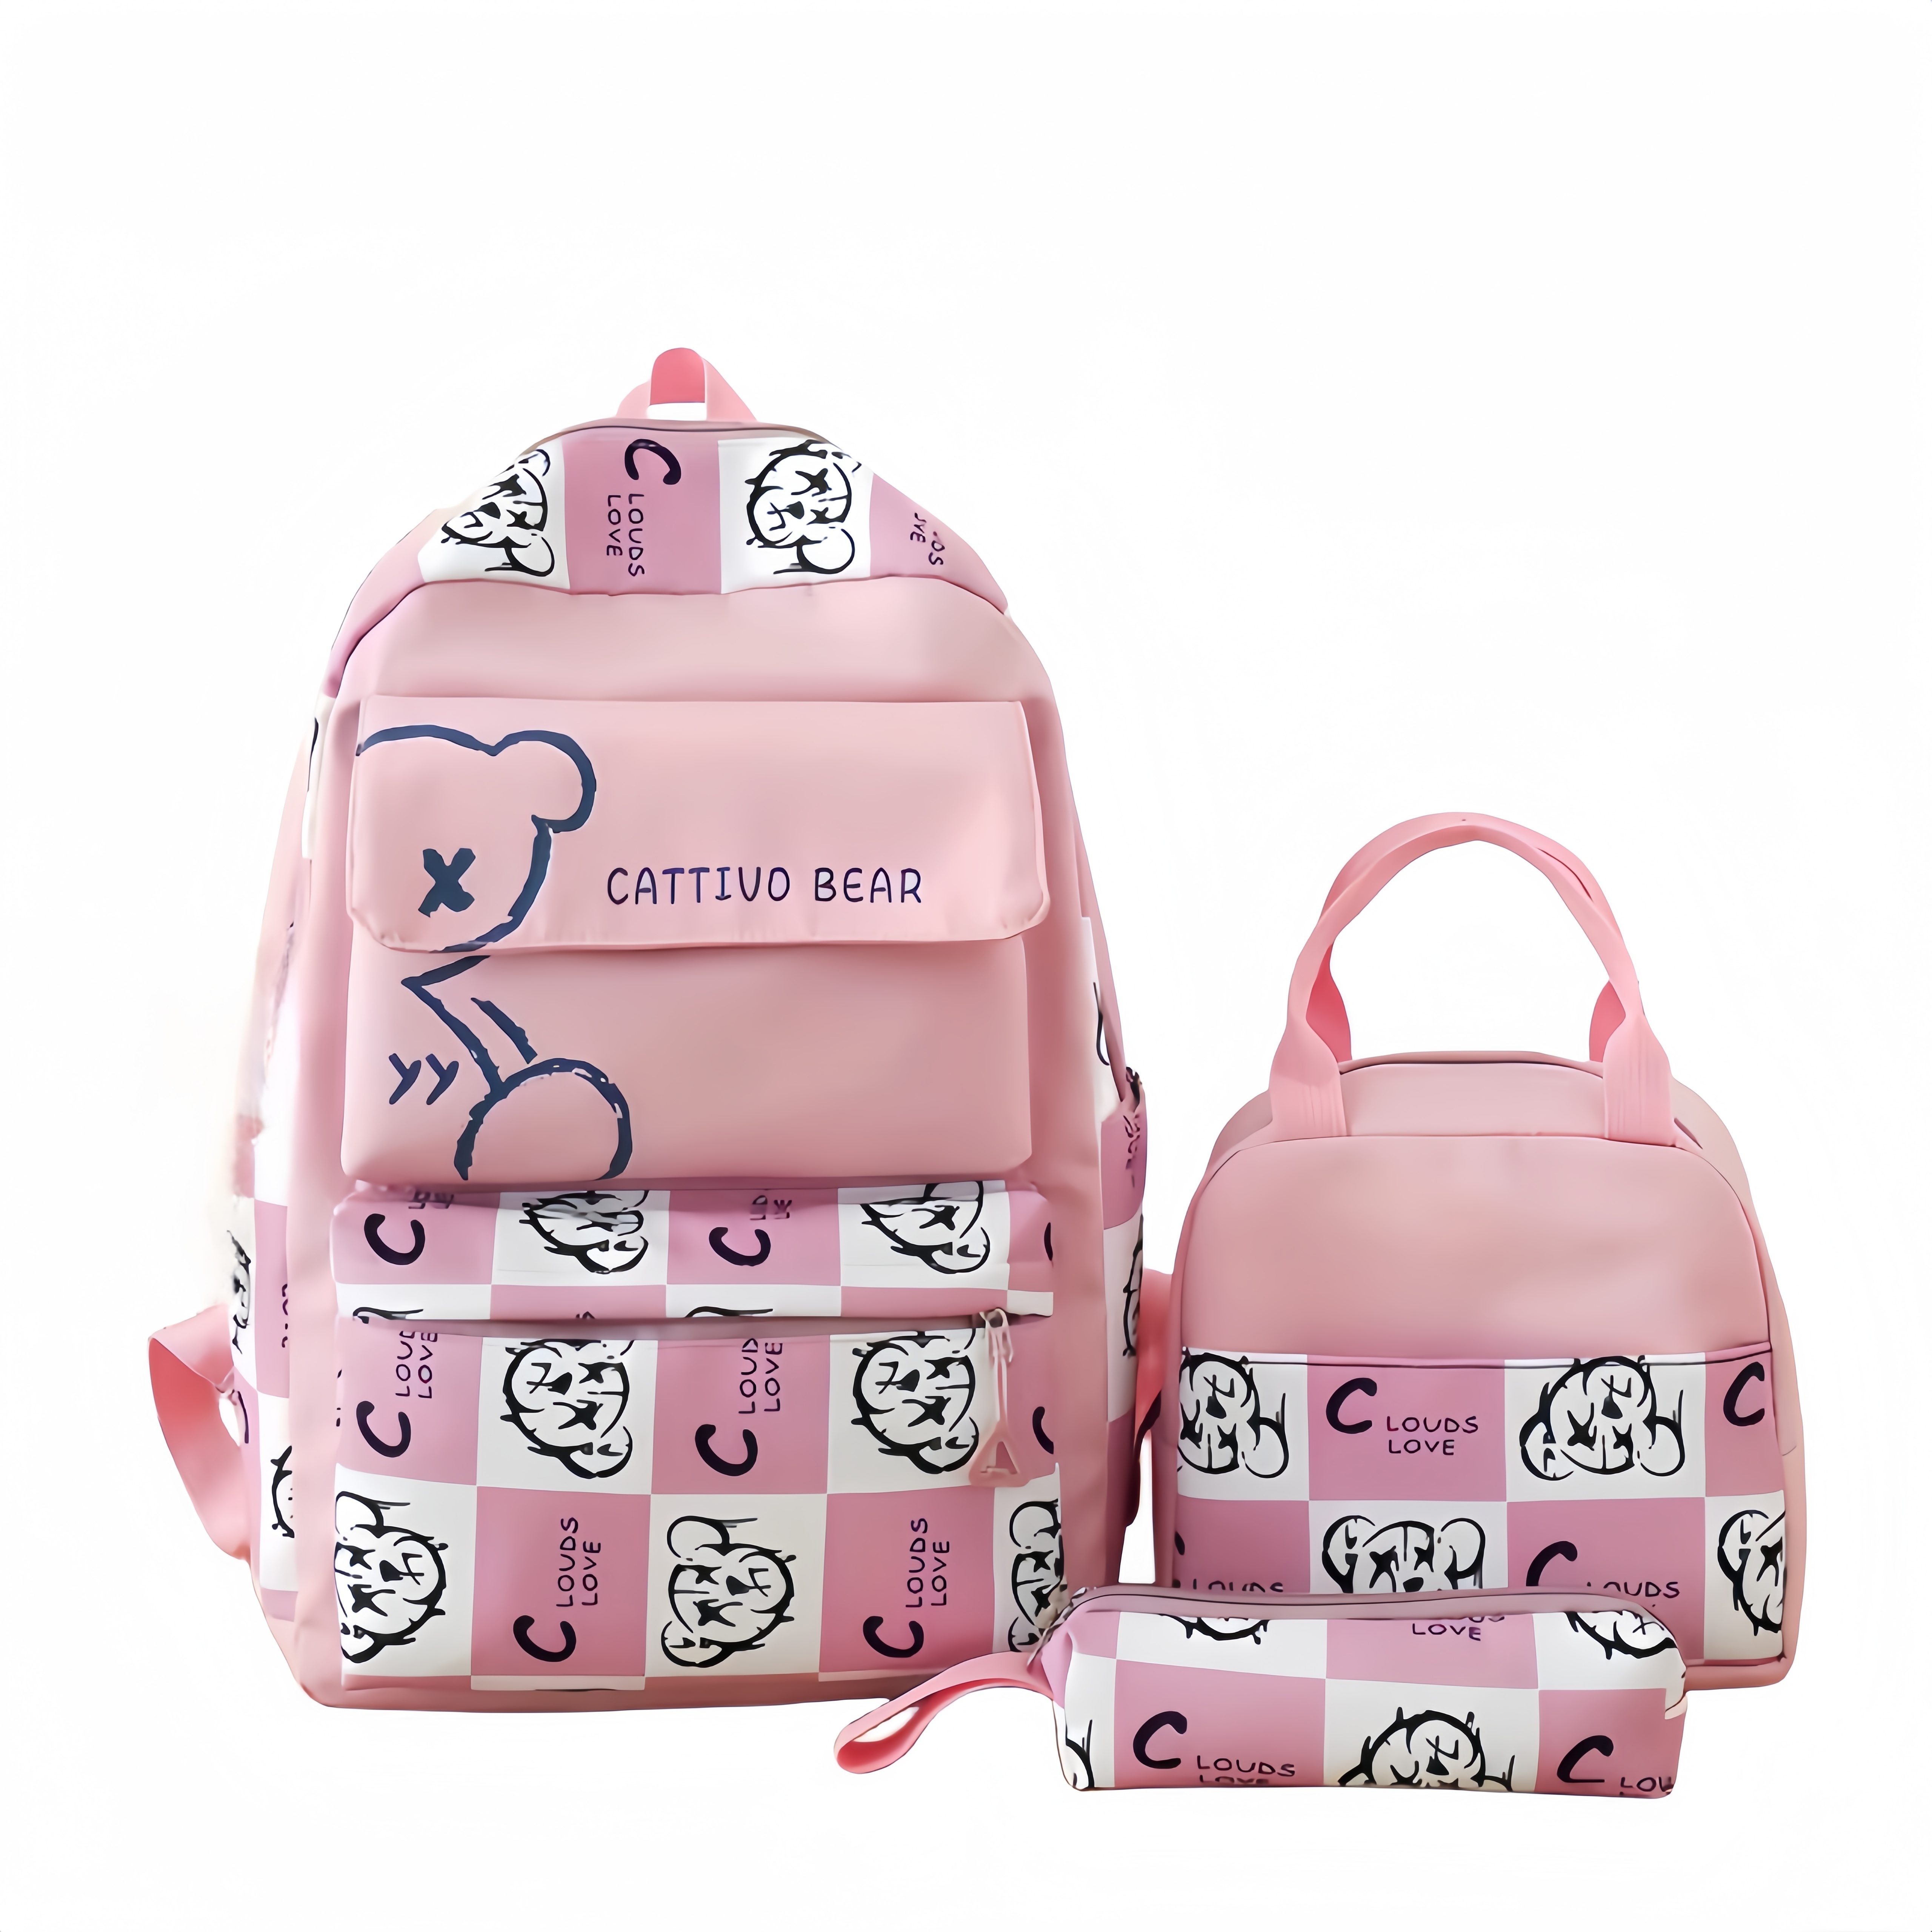 3pcs students school bags set large capacity backpack with insulated lunch bag and pen case